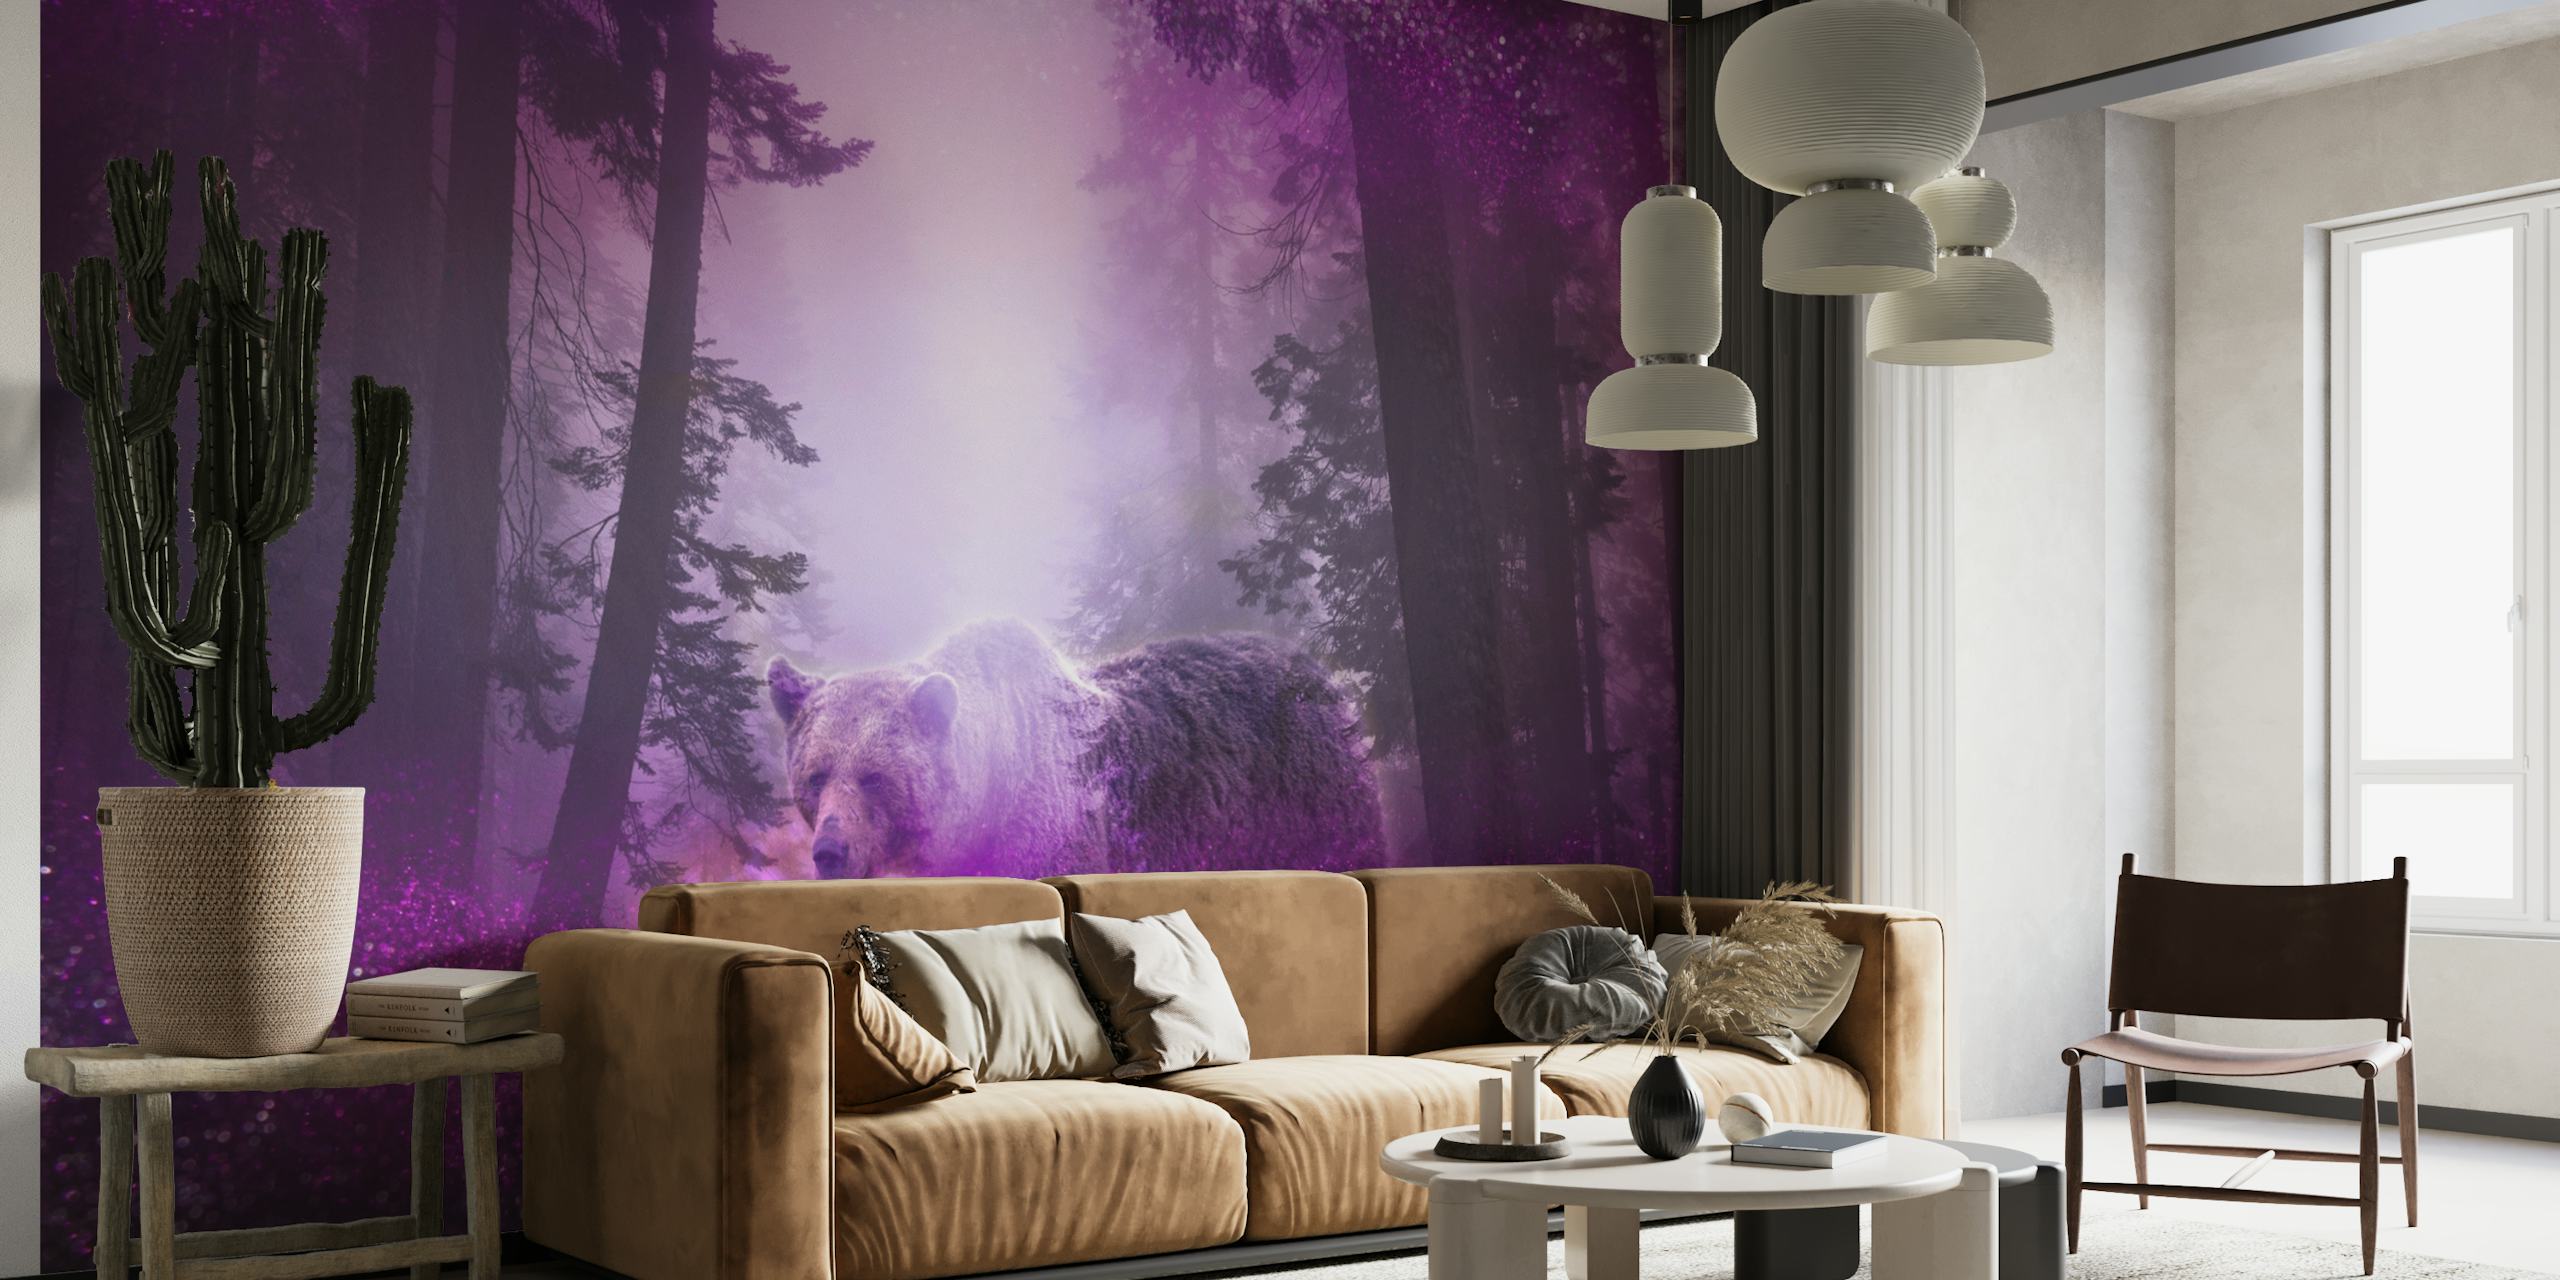 Surreal wall mural featuring a bear in a pink-toned forest